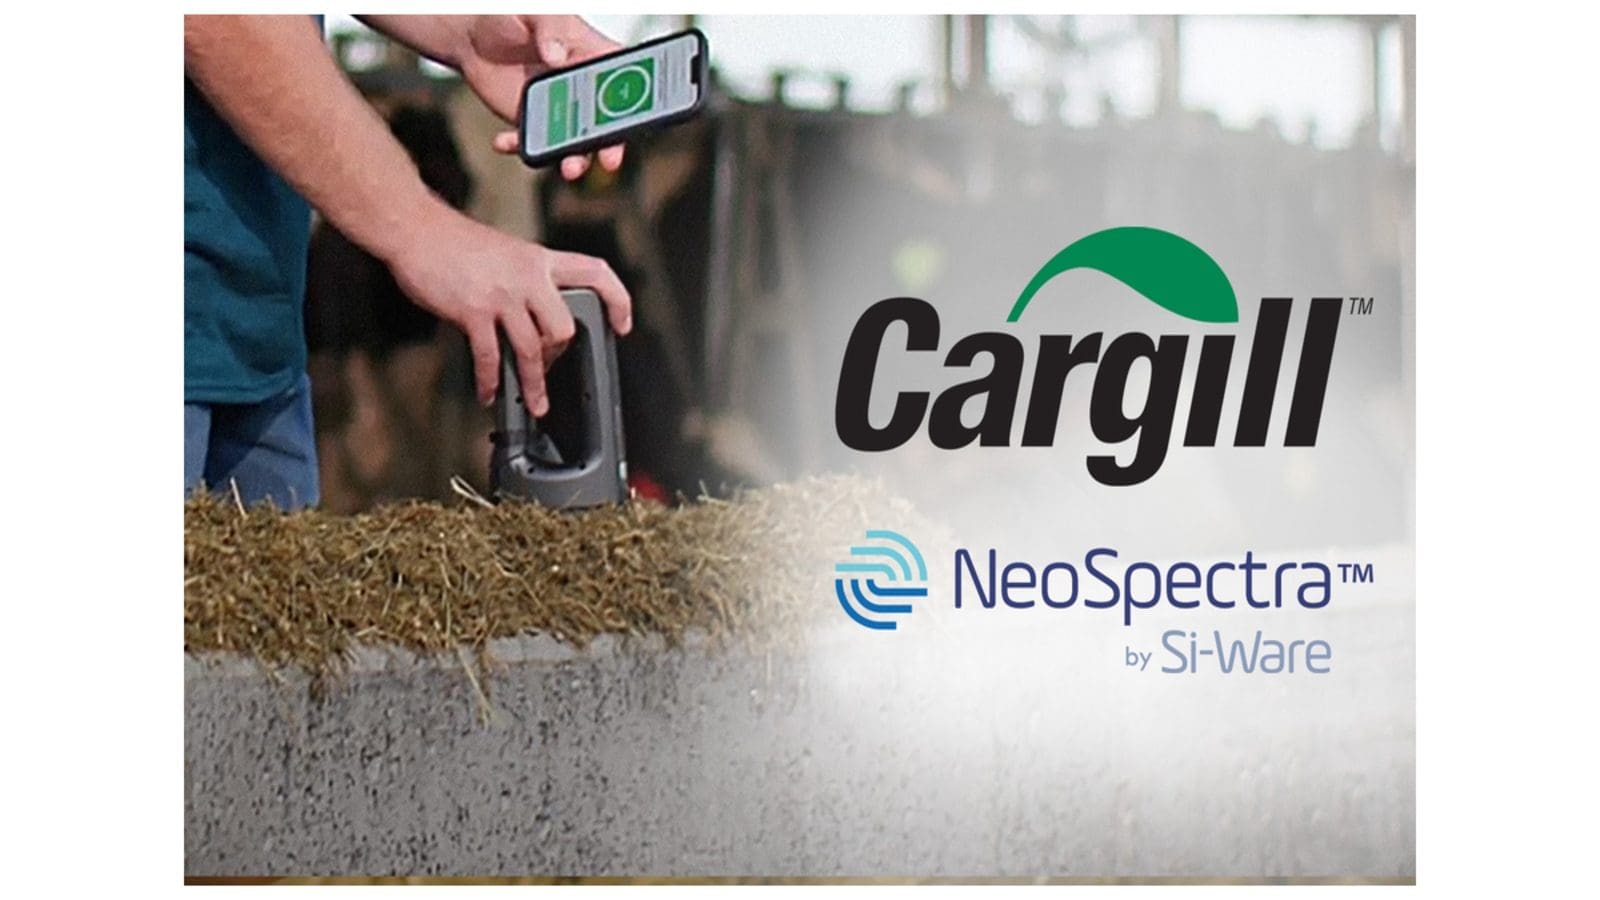 Cargill to use Si-Ware feed analysis technology to deliver better animal nutrition and increase productivity